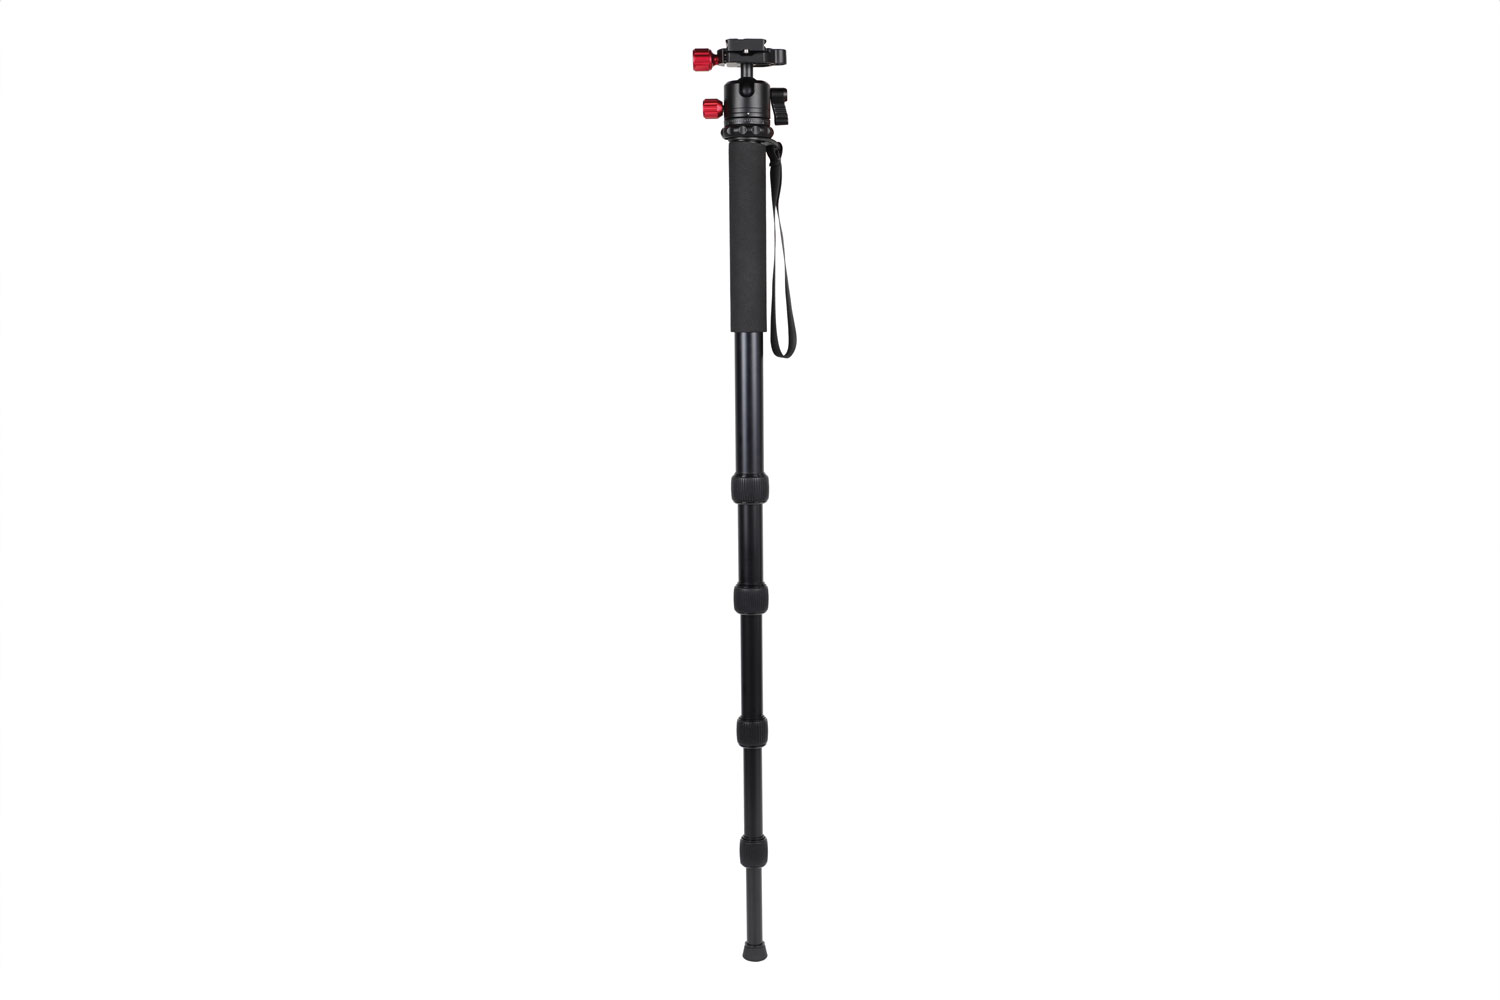 Kenro Karoo Monopod Kit standing vertically on a white background, displaying its extendable sections with a foam grip handle and a black ball head with red accents.